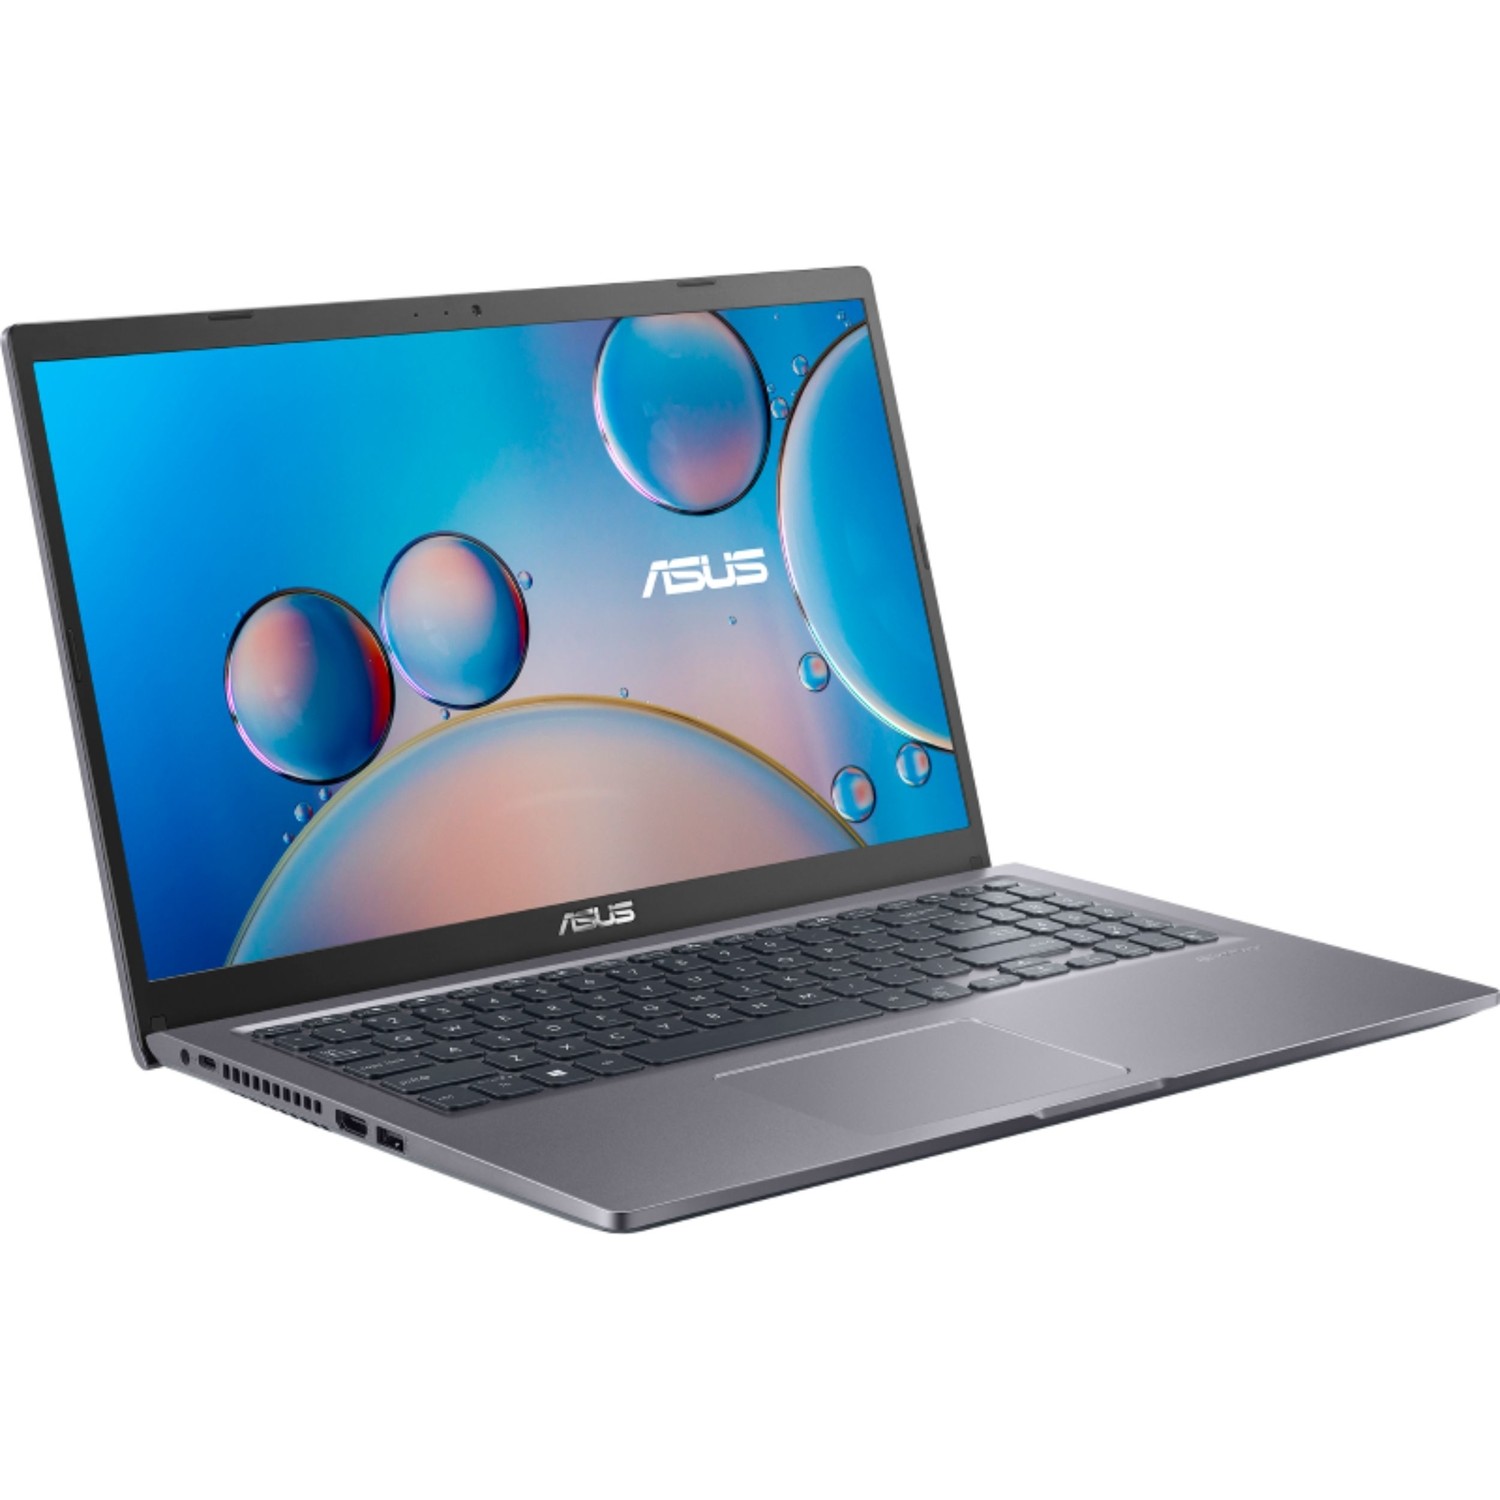 Asus%20X515JF-BR229T%20Intel%20Core%20i5%201035G1U%204GB%20256GB%20SSD%20MX130%20Windows%2010%20Home%2015.6’’%20Notebook